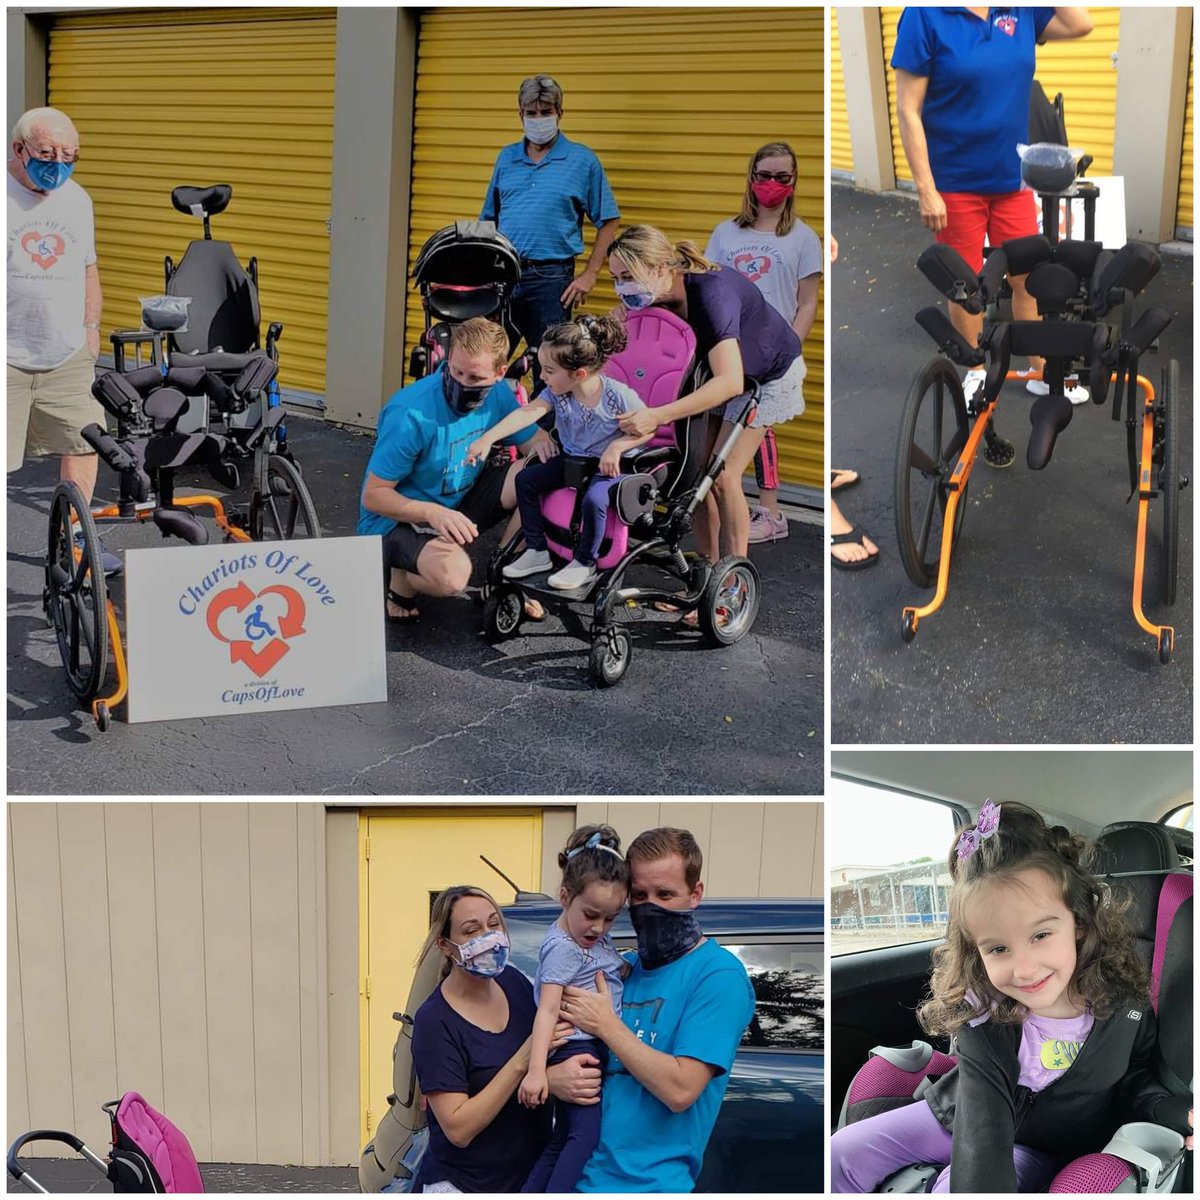 First #GiftOfMobility for 2021. 5 year old Scarlett received gait trainer. #Thankful and loving family. Our #138 from #ChariotsOfLove #MobilityChallenged #QIC2020 #DoingTheRightThing #FreeWheelchairs #NeedFunding #nonprofit #Donate